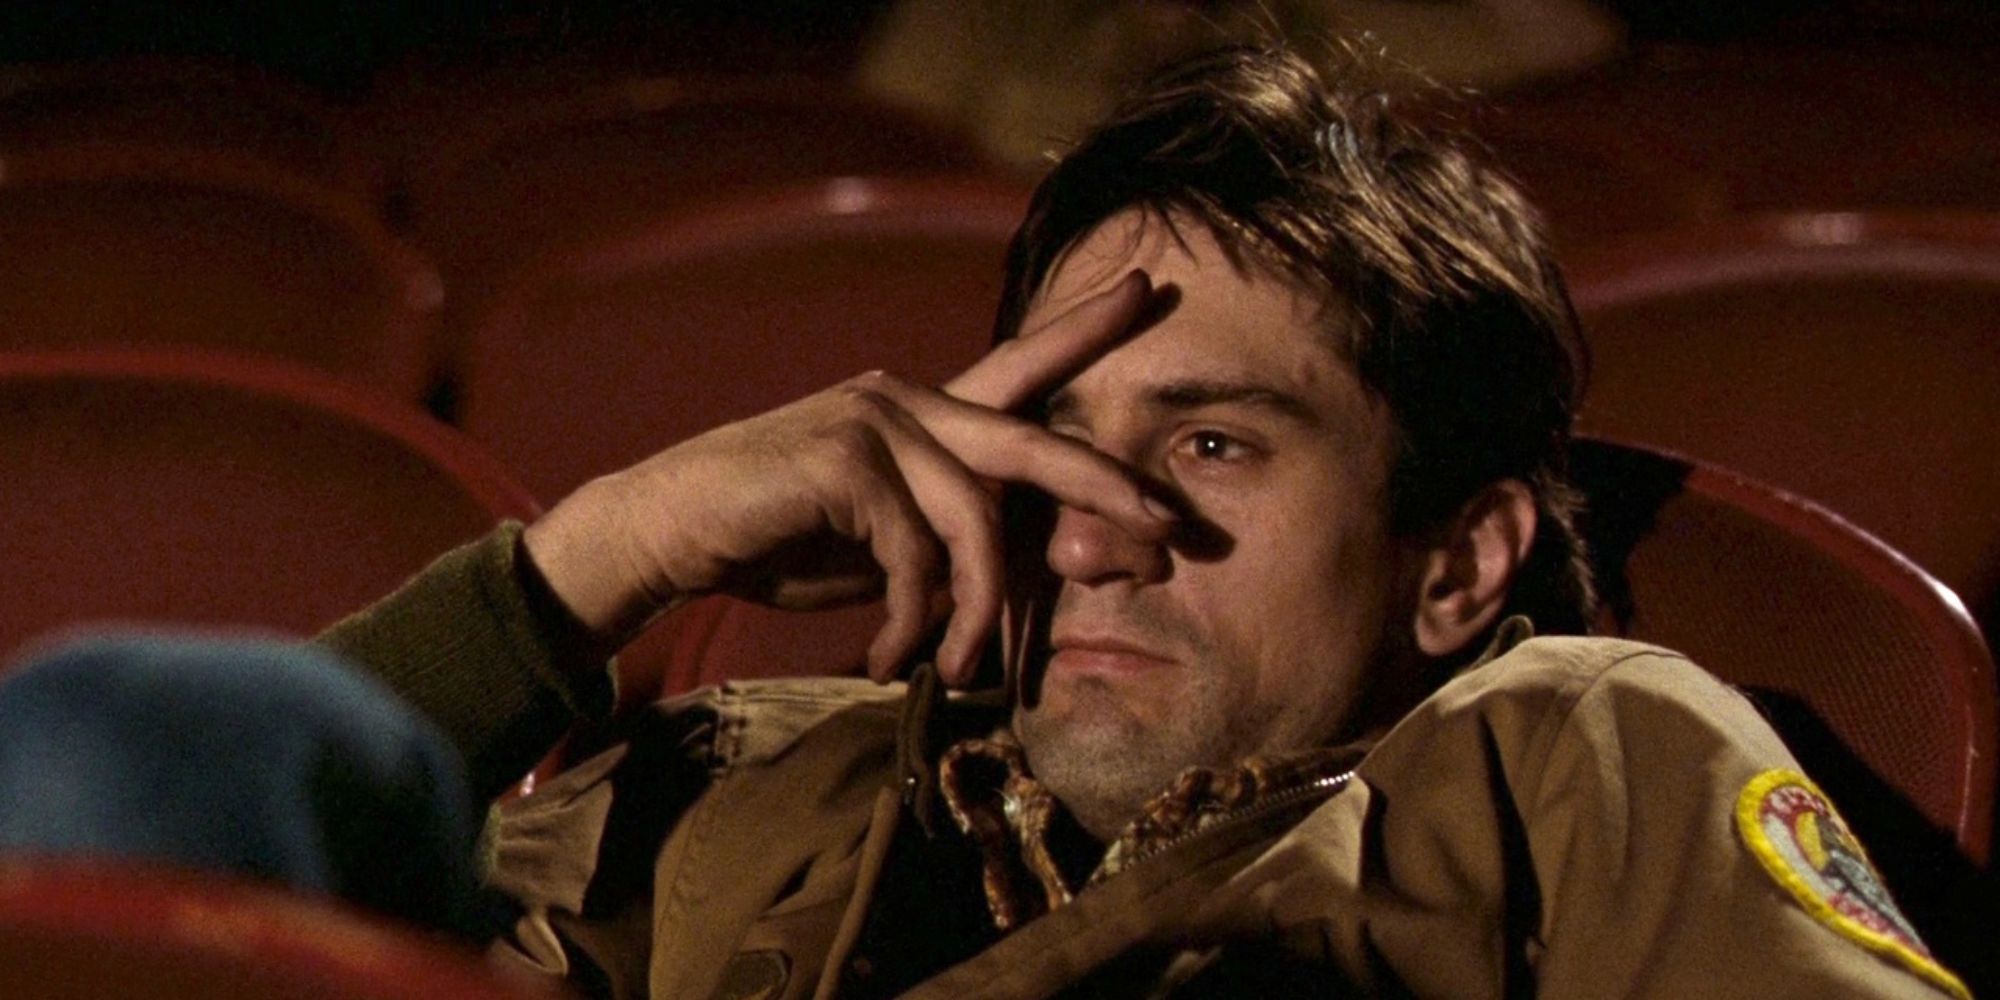 A close-up shot of Robert De Niro hiding his face behind two fingers while sitting in a movie theater in Taxi Driver.